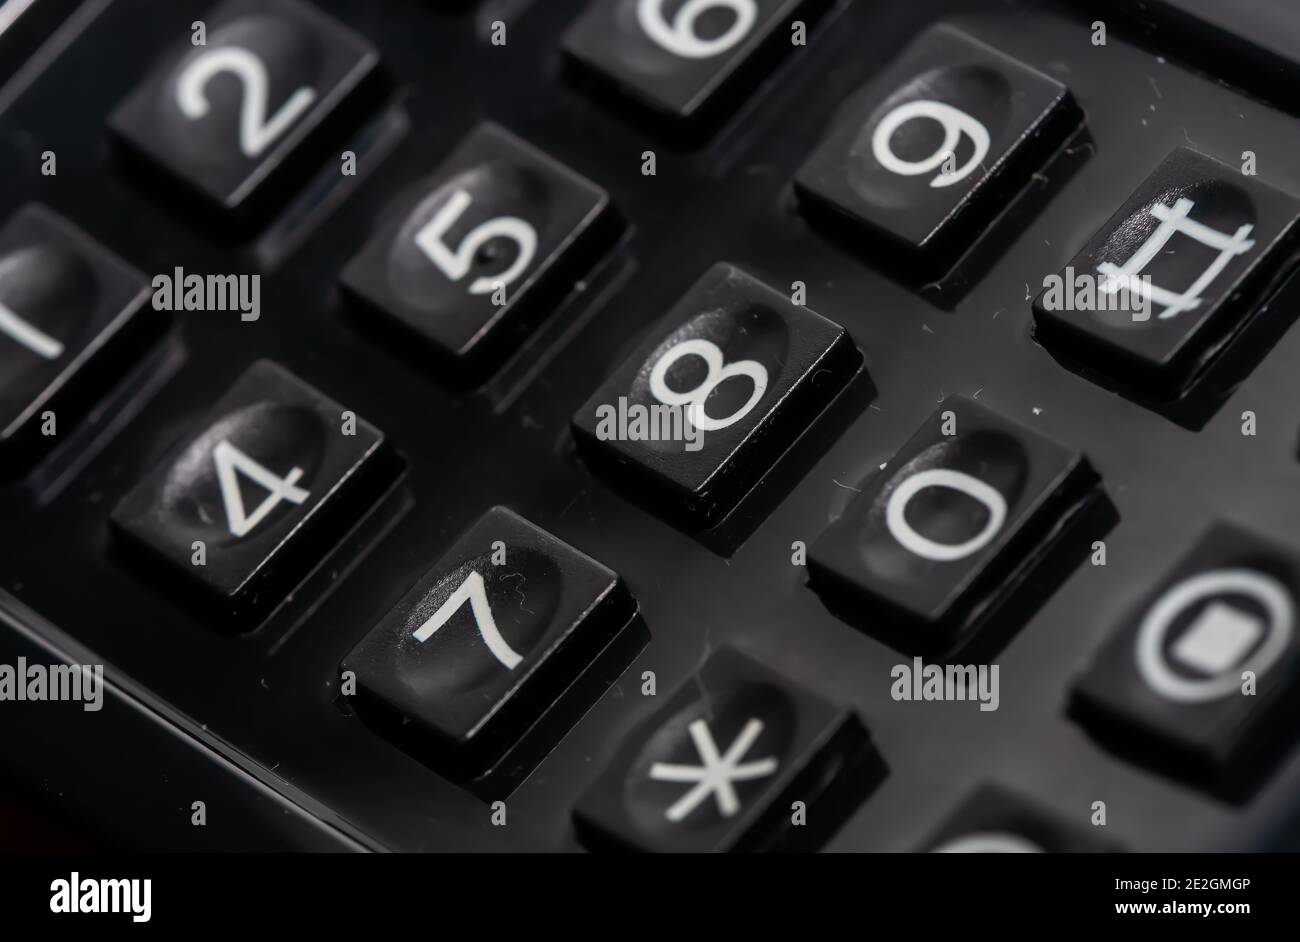 Close up of numerical dial buttons on an old analog phone.  Stock Photo